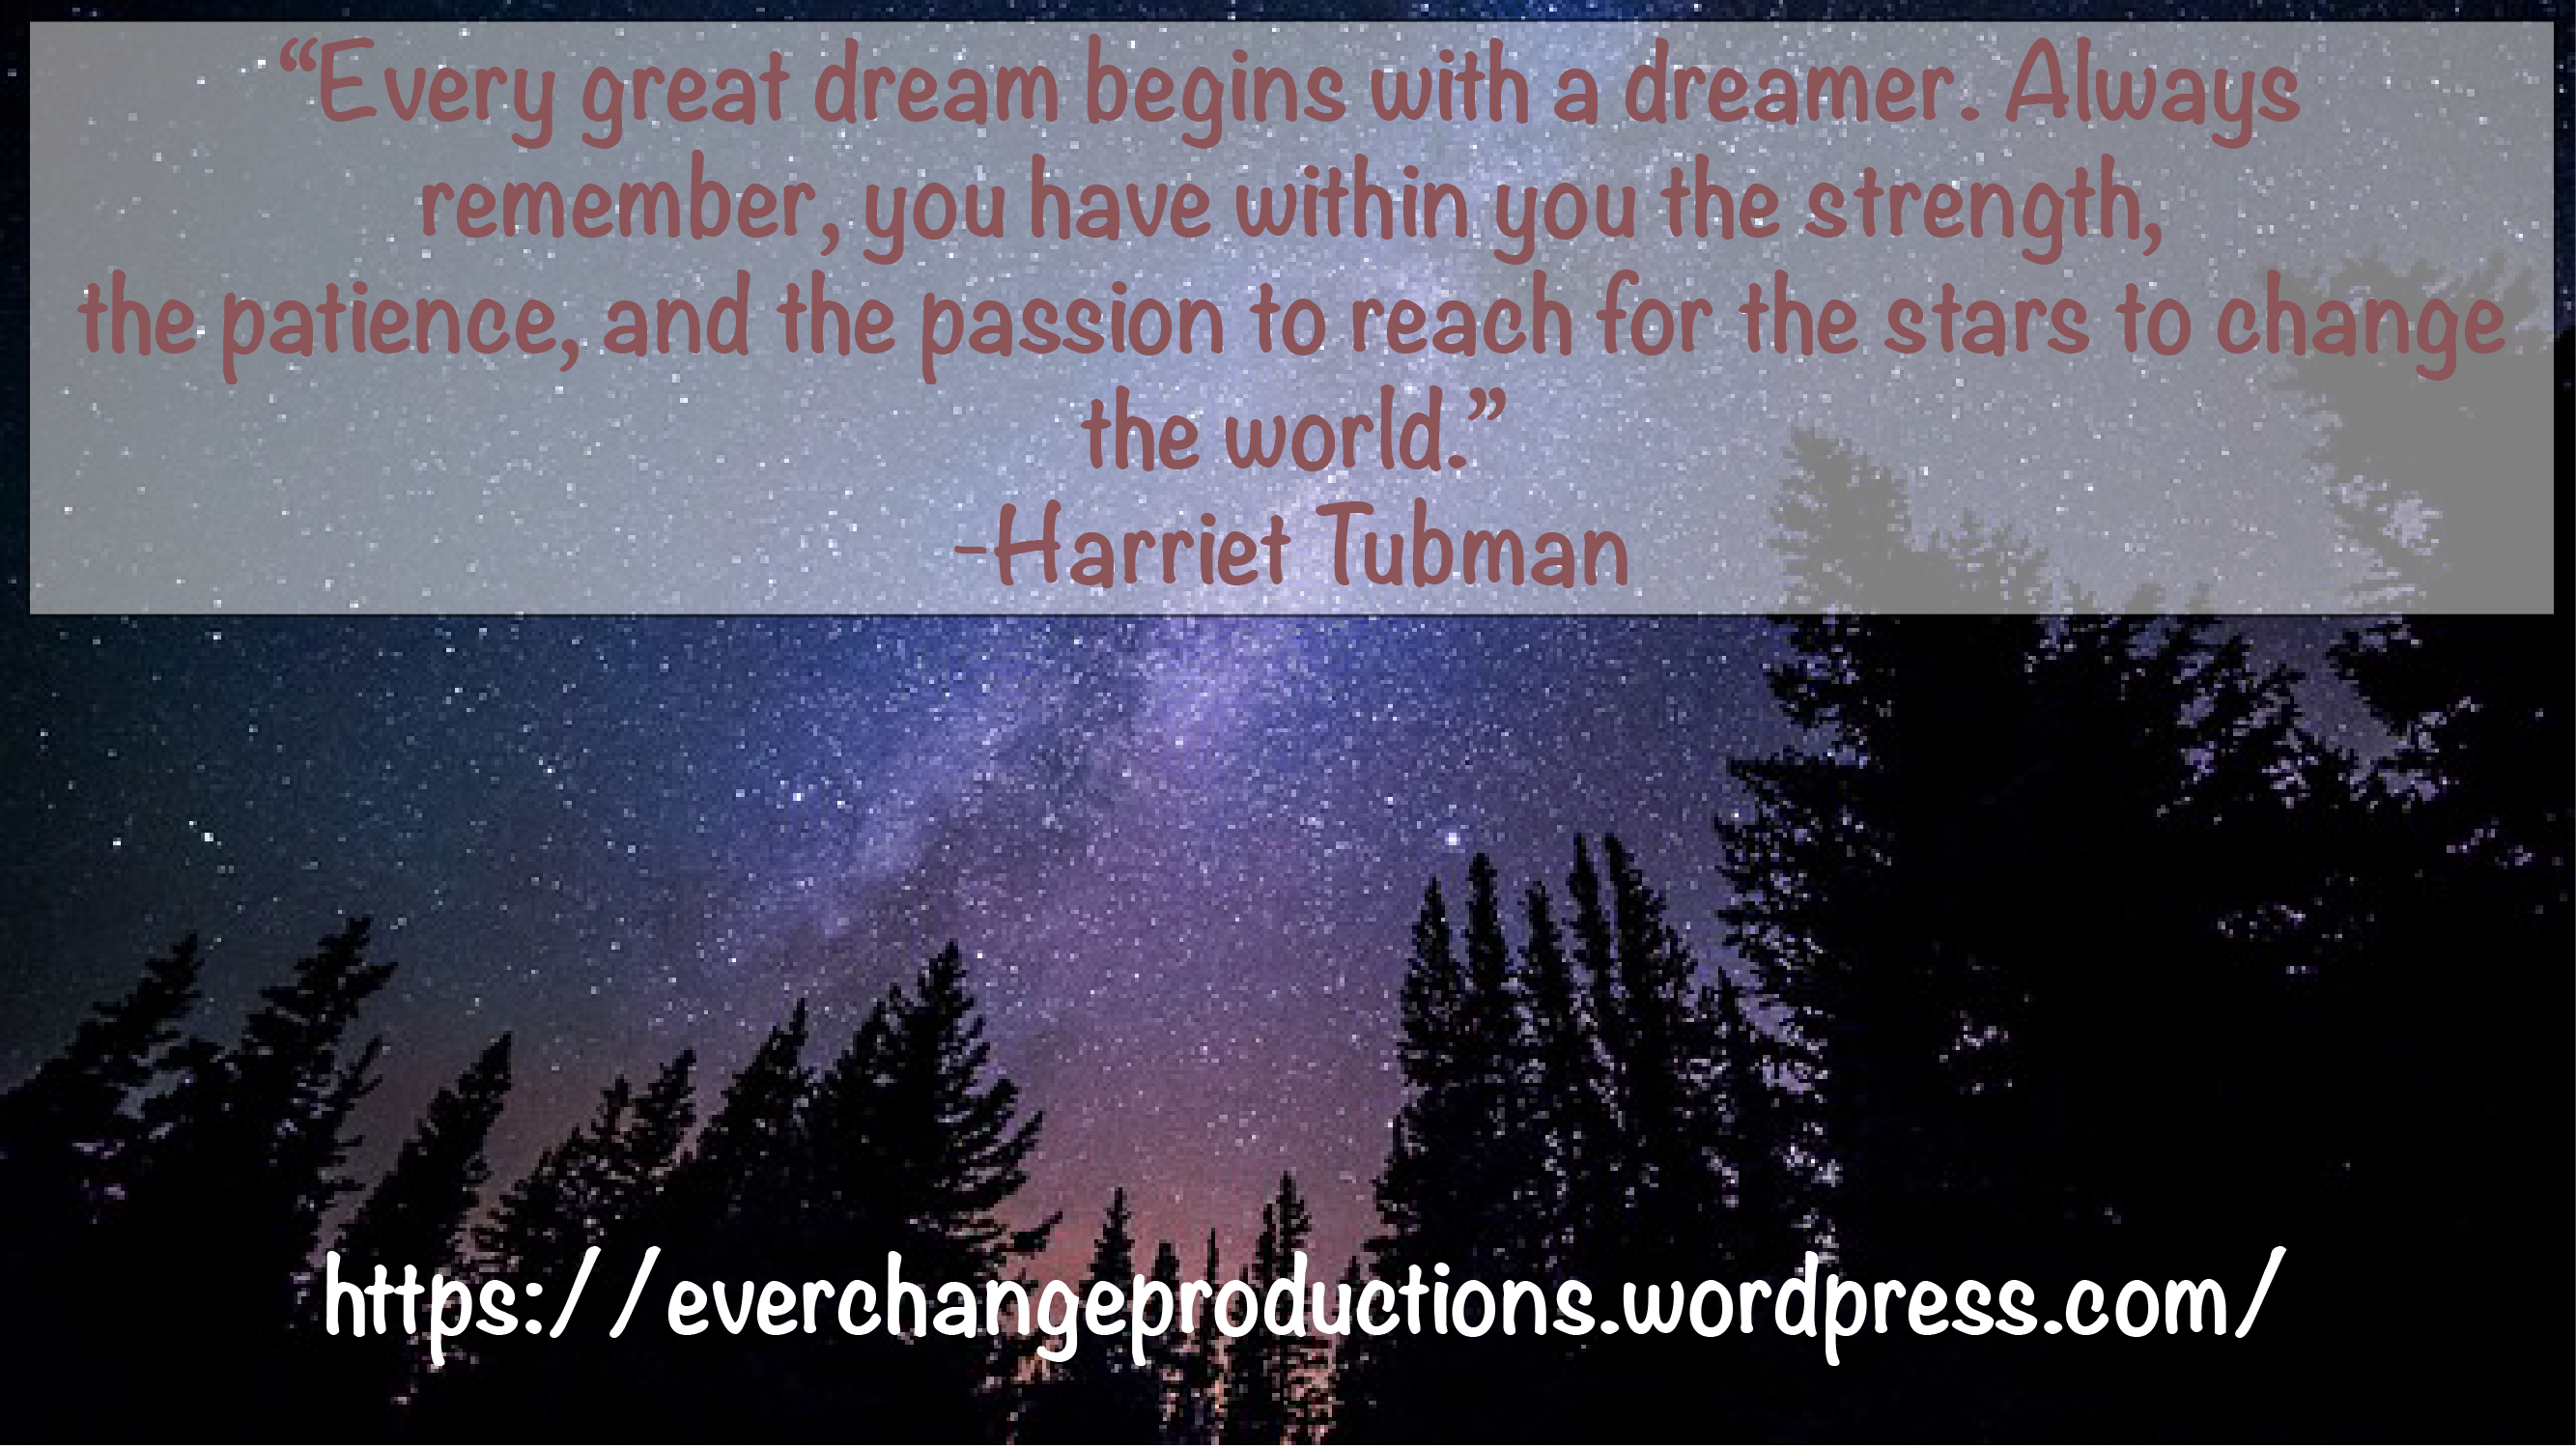 Need some Monday Motivation to start your week off? Just remember: "Every great dream begins with a dreamer. Always remember, you have within you the strength, the patience, and the passion to reach for the stars to change the world."- Harriet Tubman